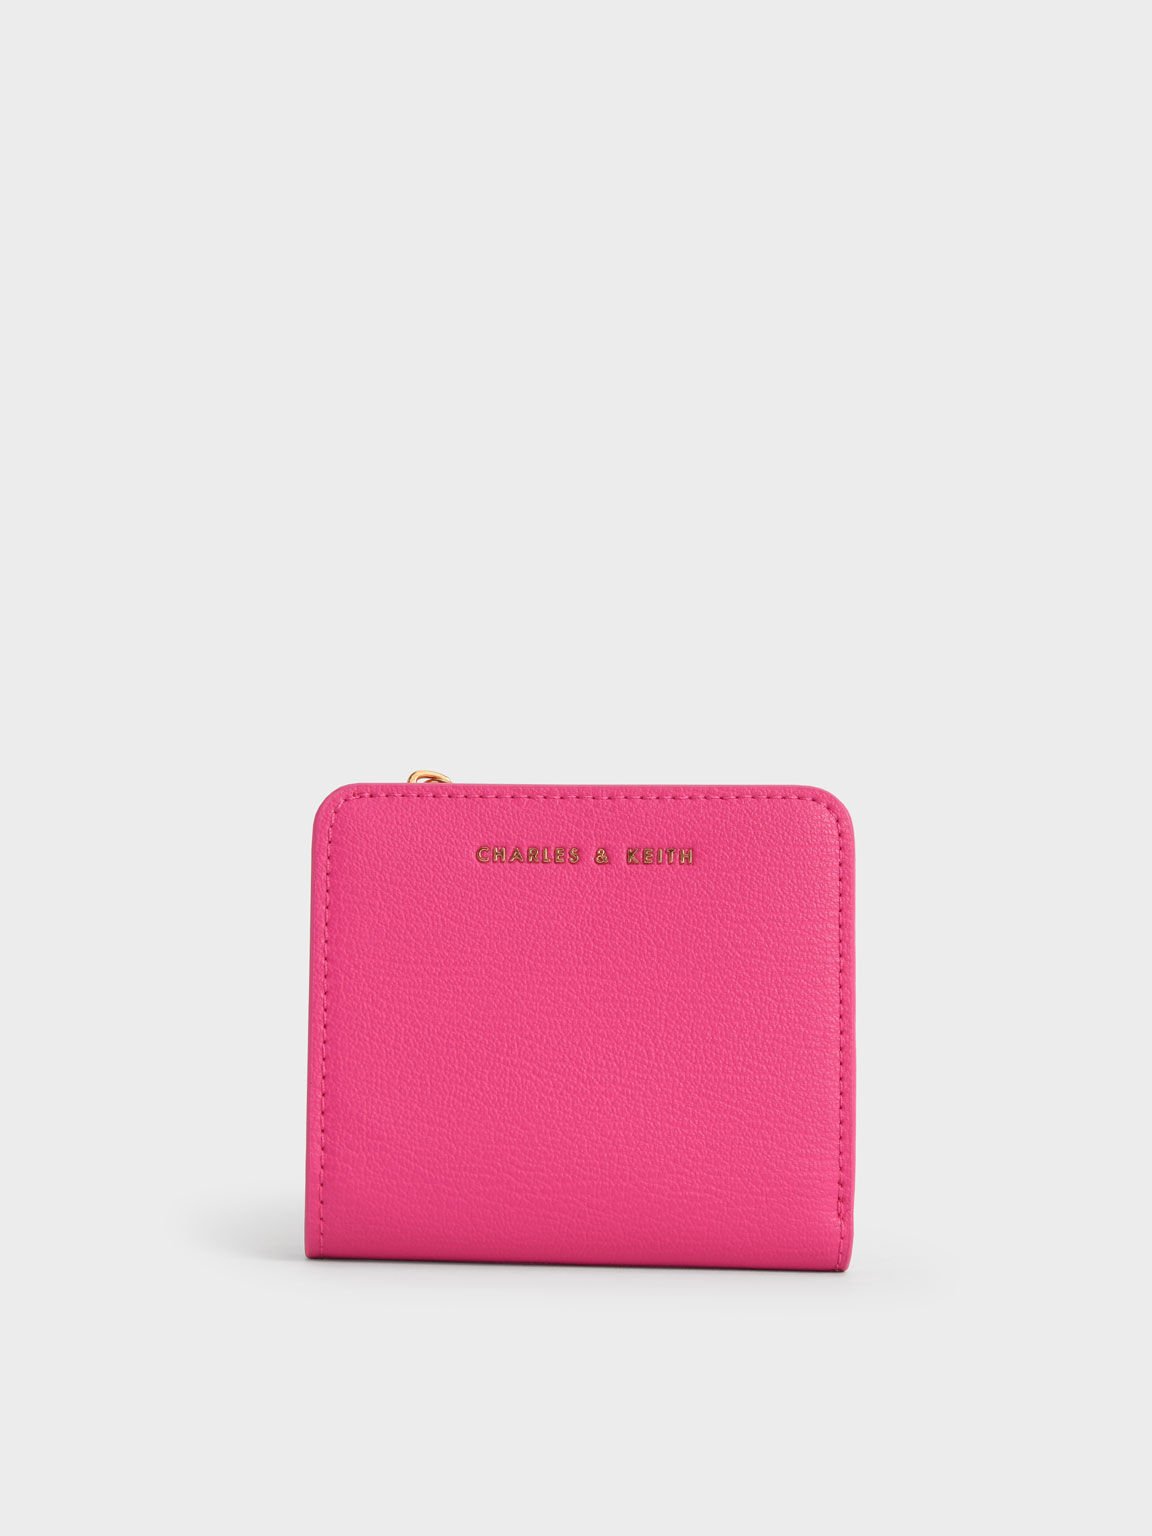 Shop Women's Wallets | Exclusive Styles - CHARLES & KEITH US